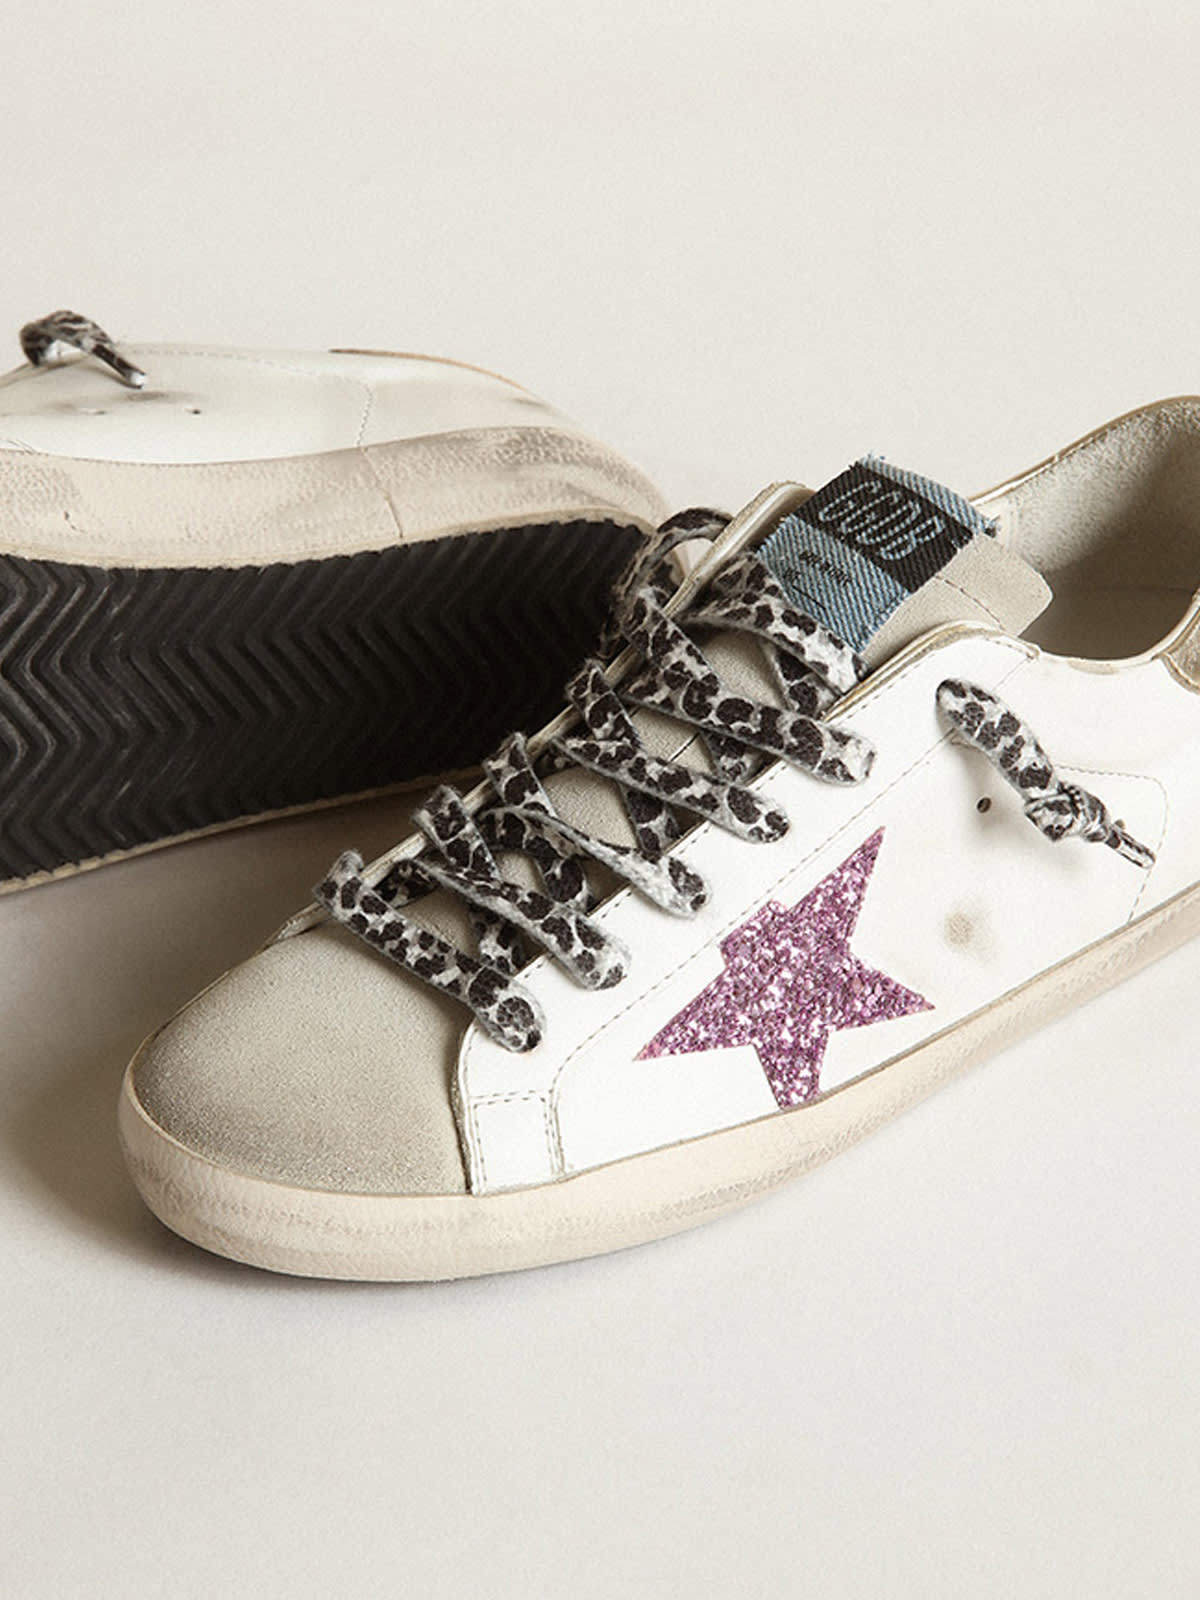 Women's Super-Star with glitter and gold heel tab | Golden Goose